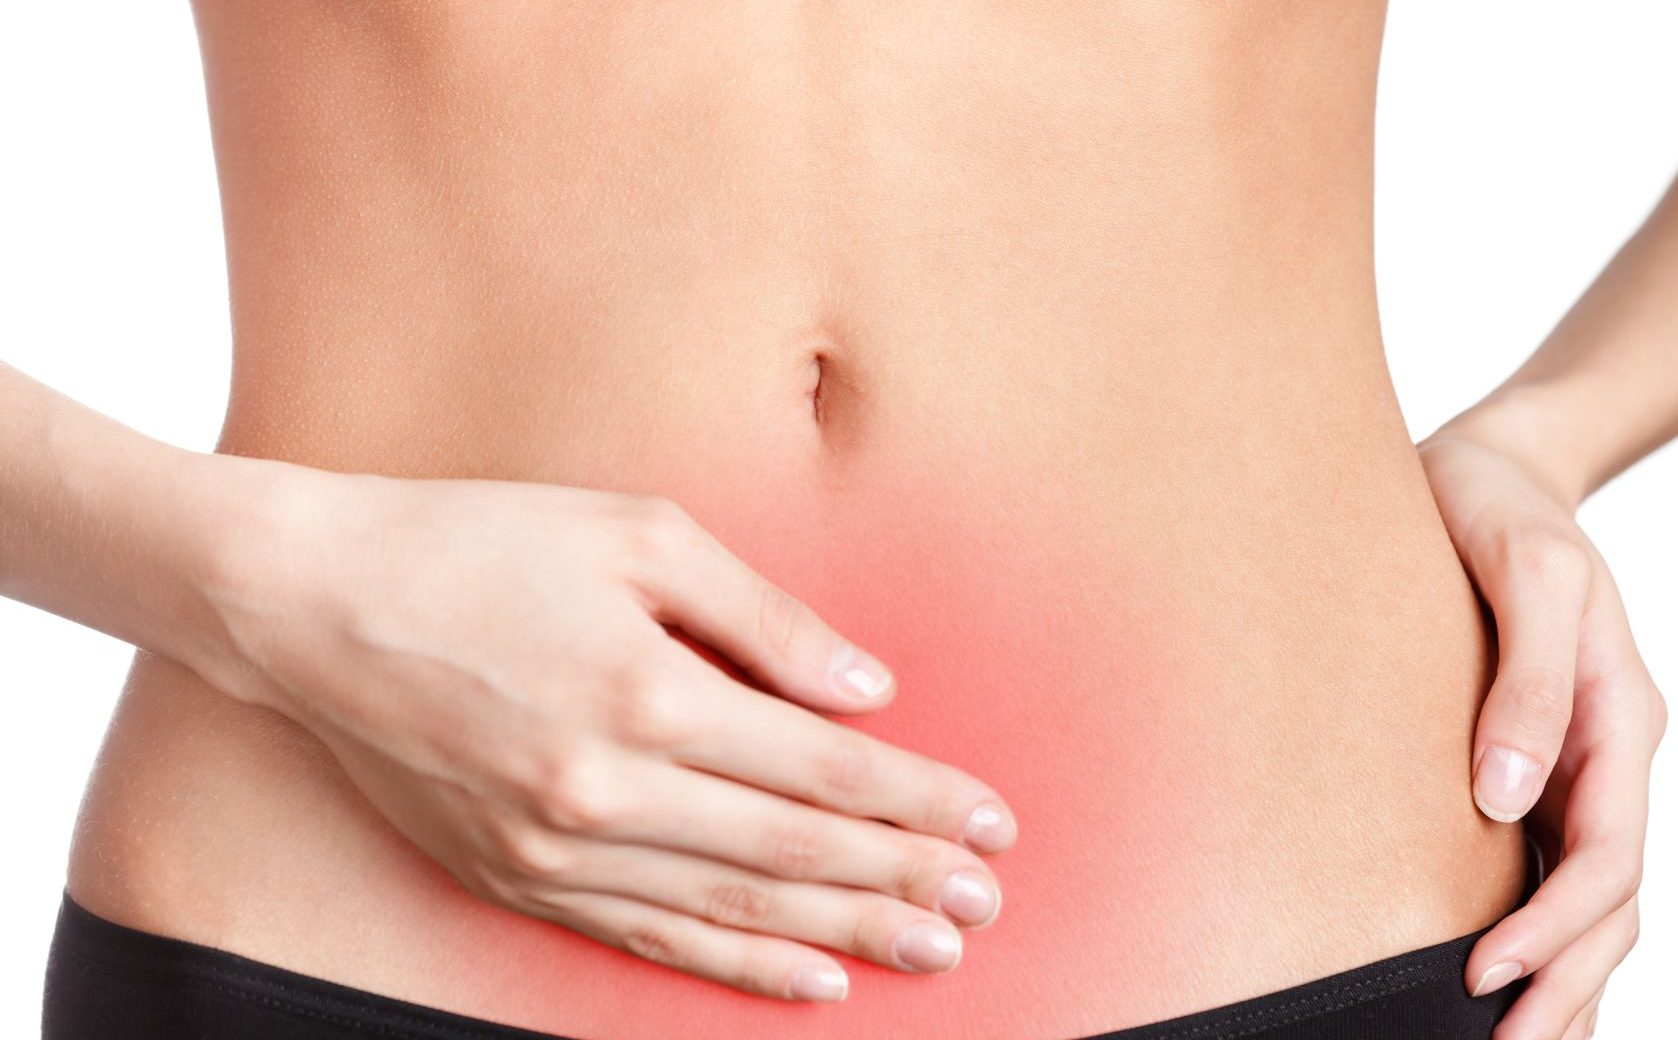 8 UTI Symptoms in Women - How to Treat Urinary Tract Infection